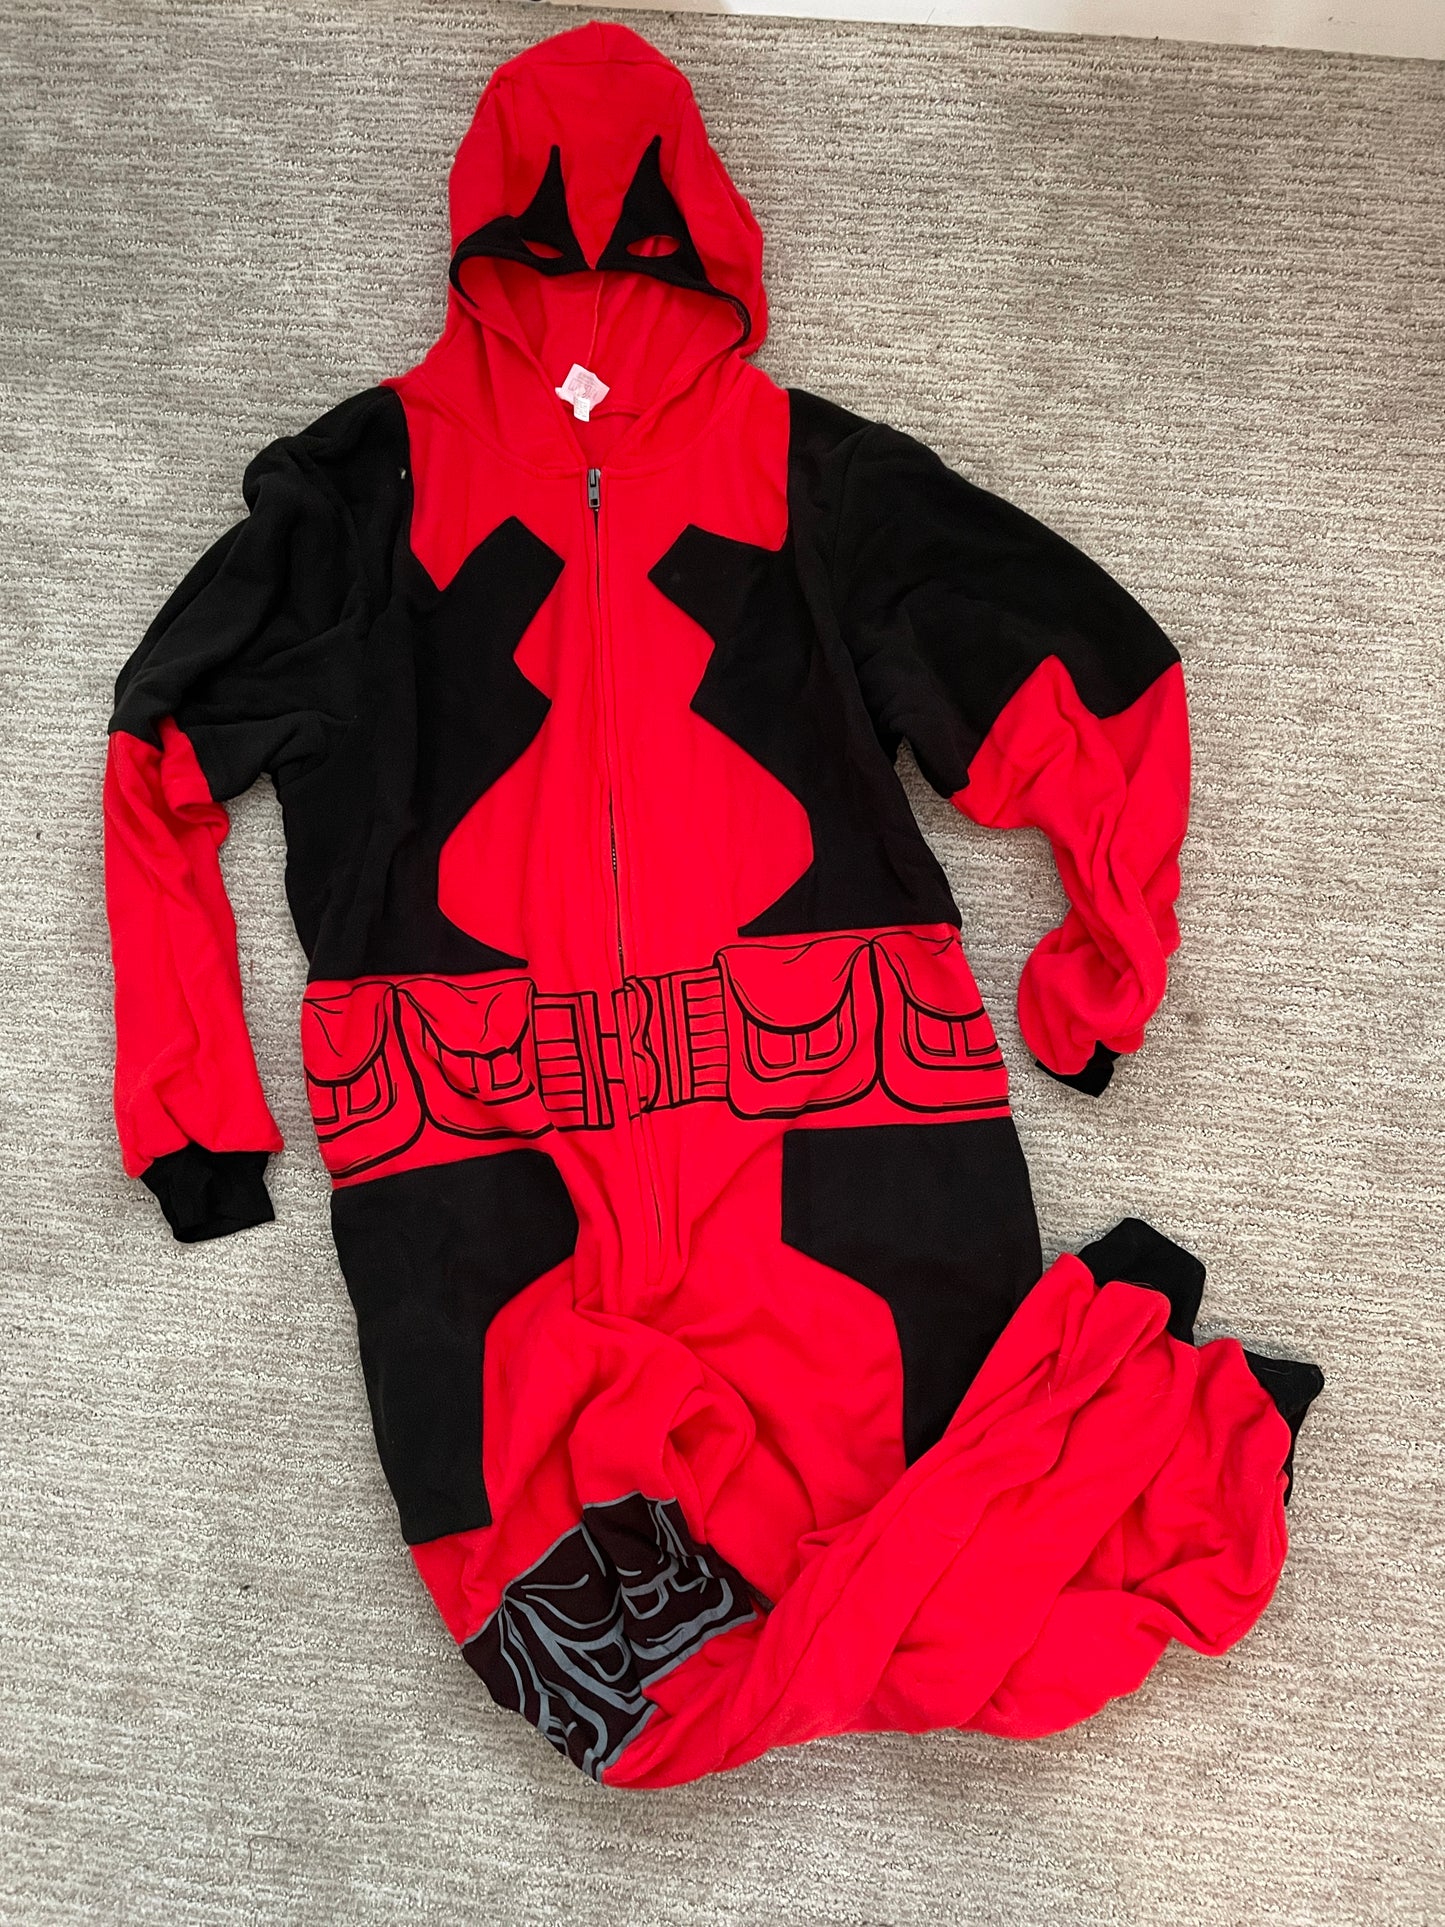 Marvel Deadpool Zipster costume for adults